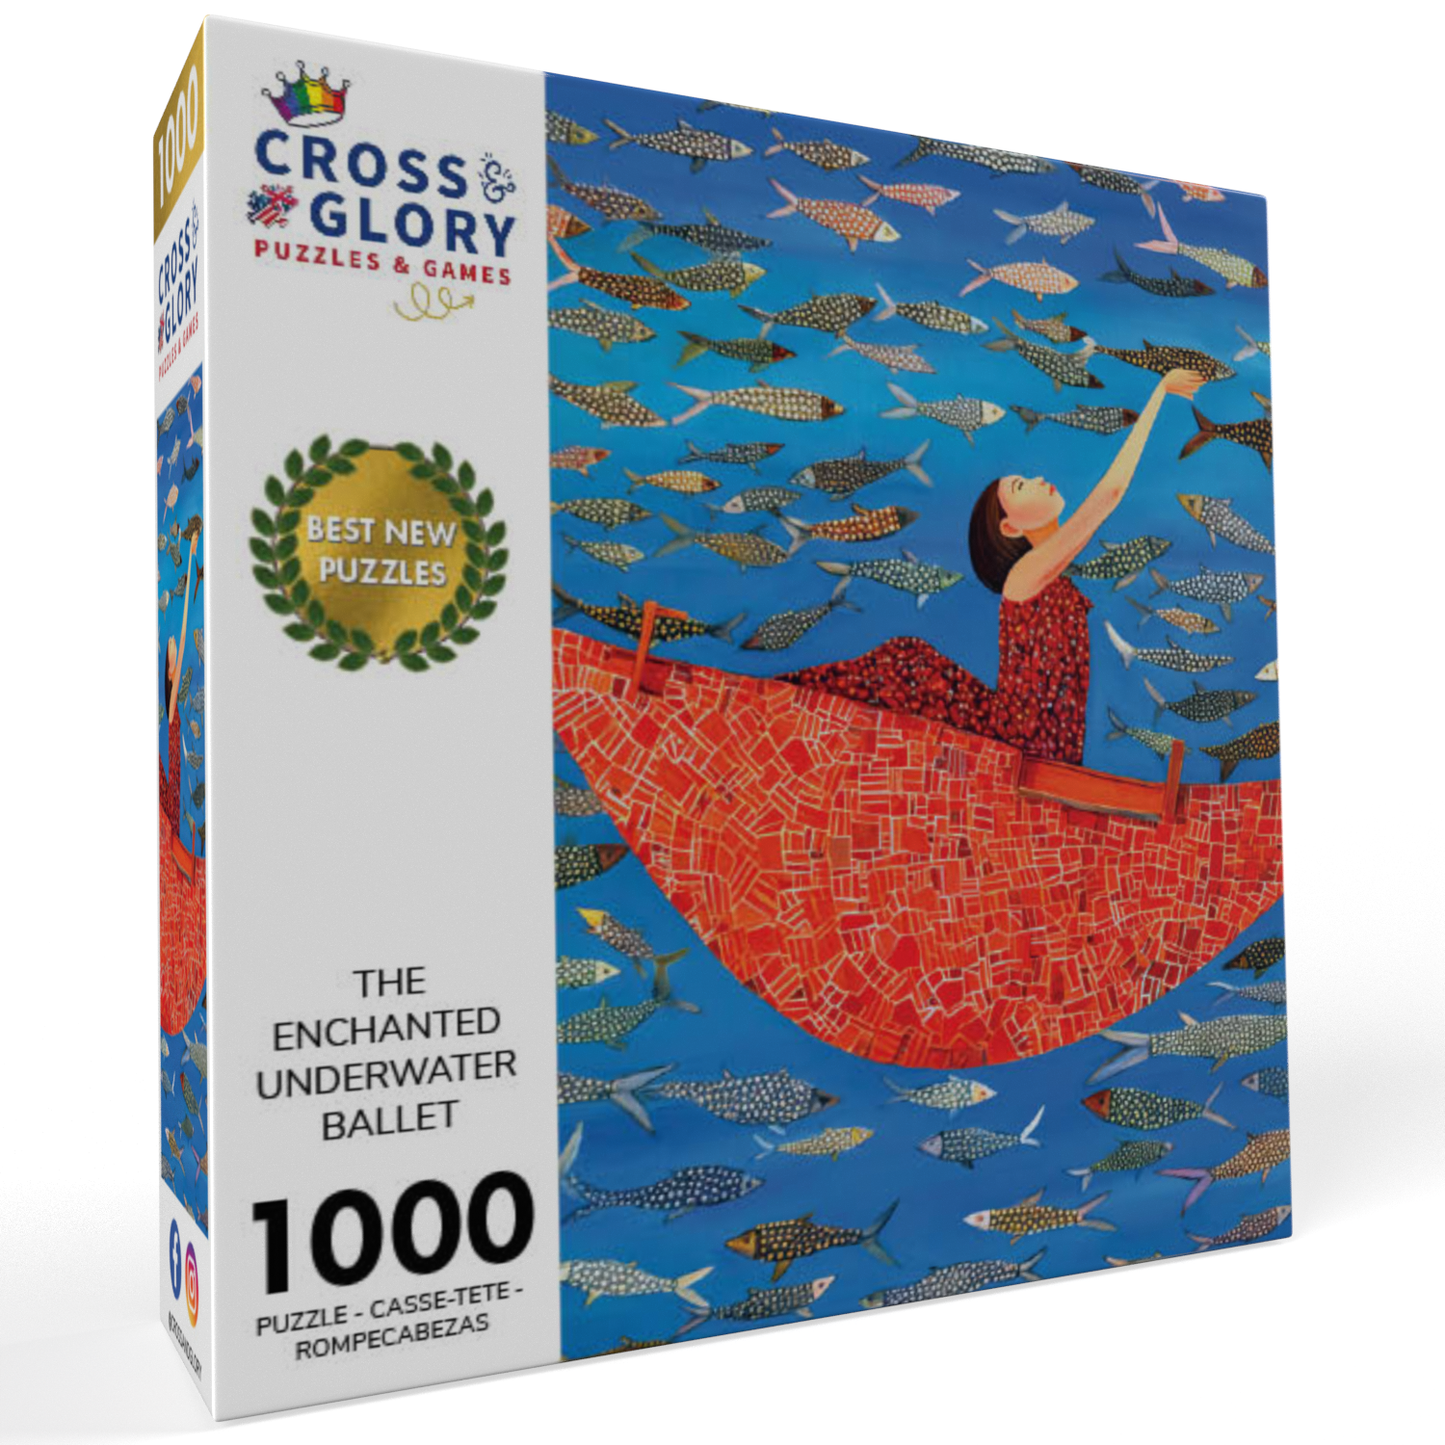 The Enchanted Underwater Ballet - 1000 Piece Jigsaw Puzzle